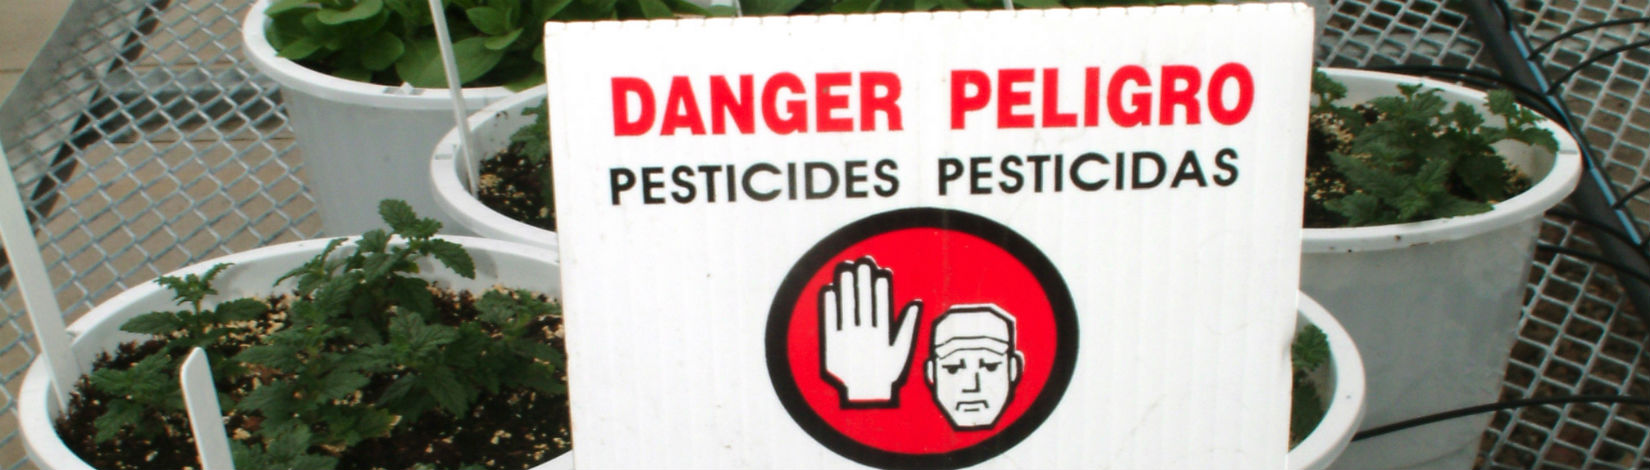 A bi-lingual sign cautioning passersby about pesticides being present. the sign reads, 